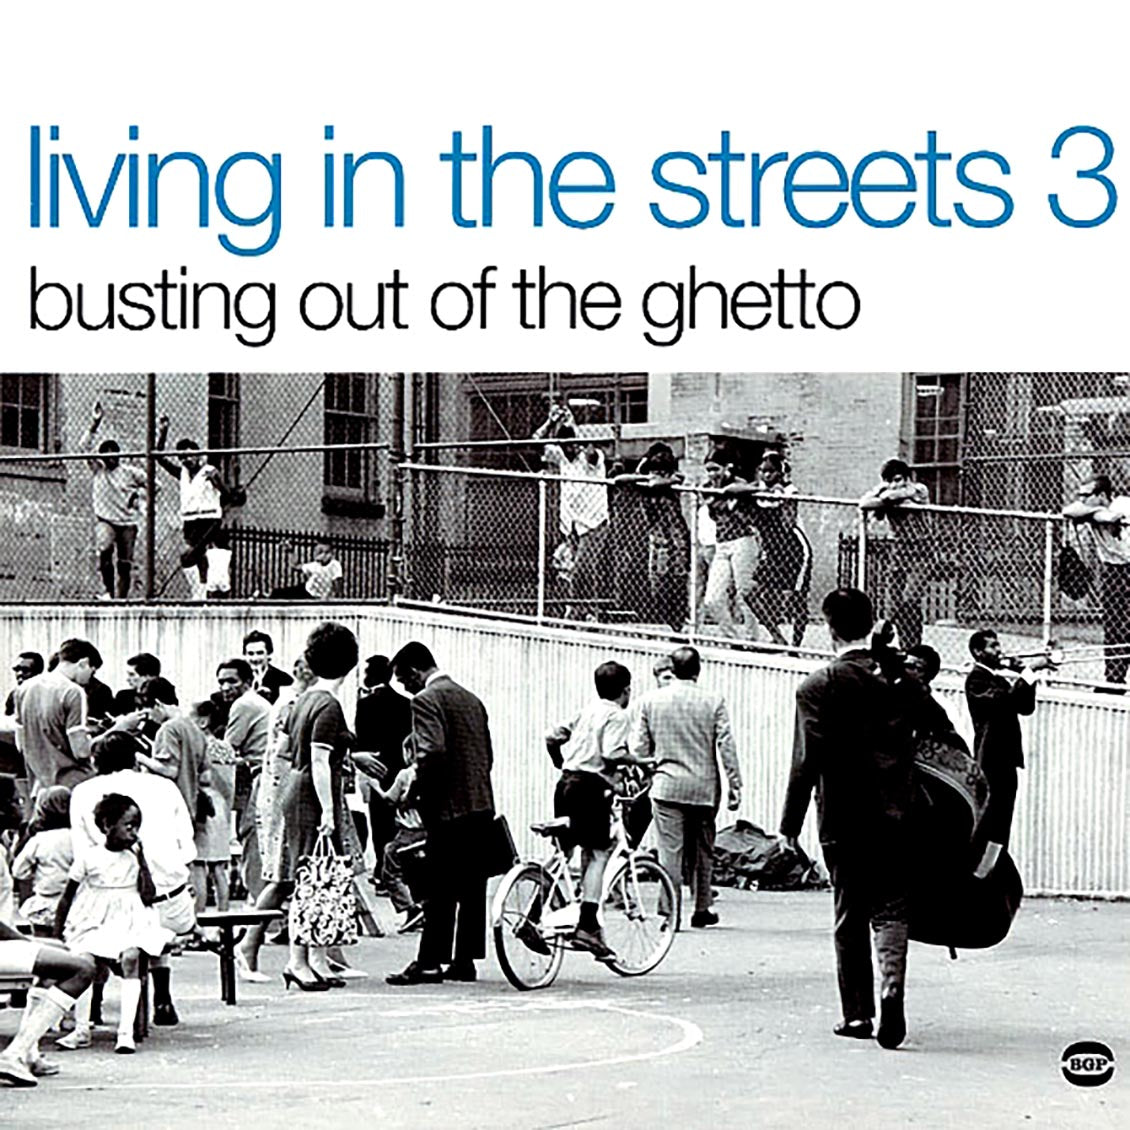 Billy Hawks, Carlos Malcolm, The Mighty Tom Cats, Etc. - Living In The Streets 3: Busting Out Of The Ghetto (Wah Wah Jazz, Funky Soul And Other Good Grooves) (2xLP) - Vinyl LP